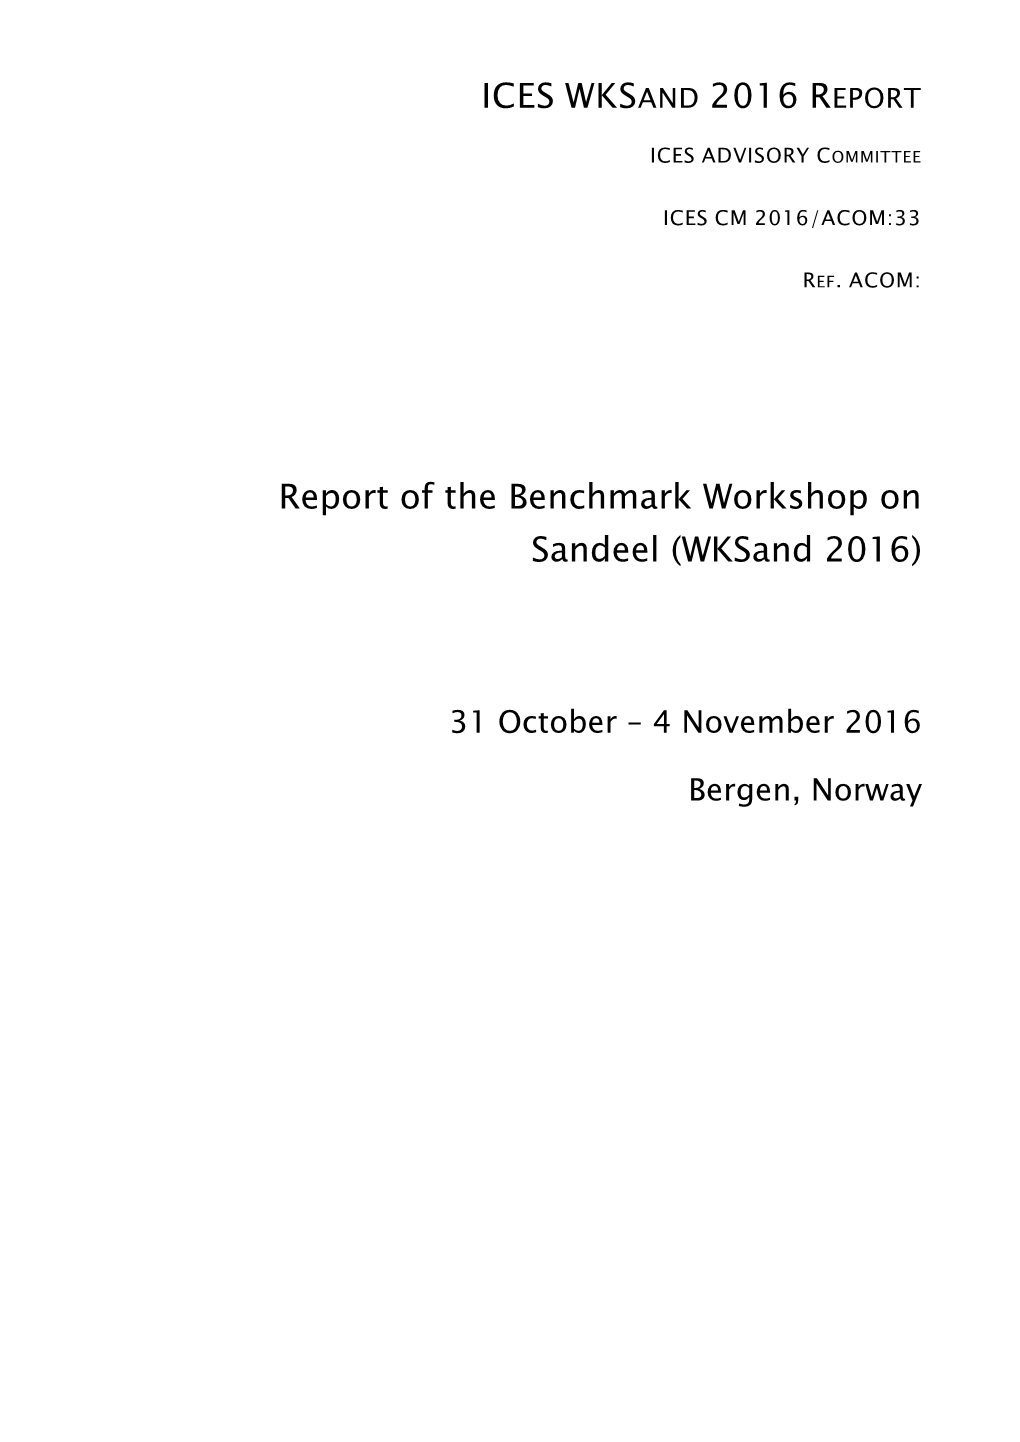 ICES WKS and 2016 REPORT Report of the Benchmark Workshop